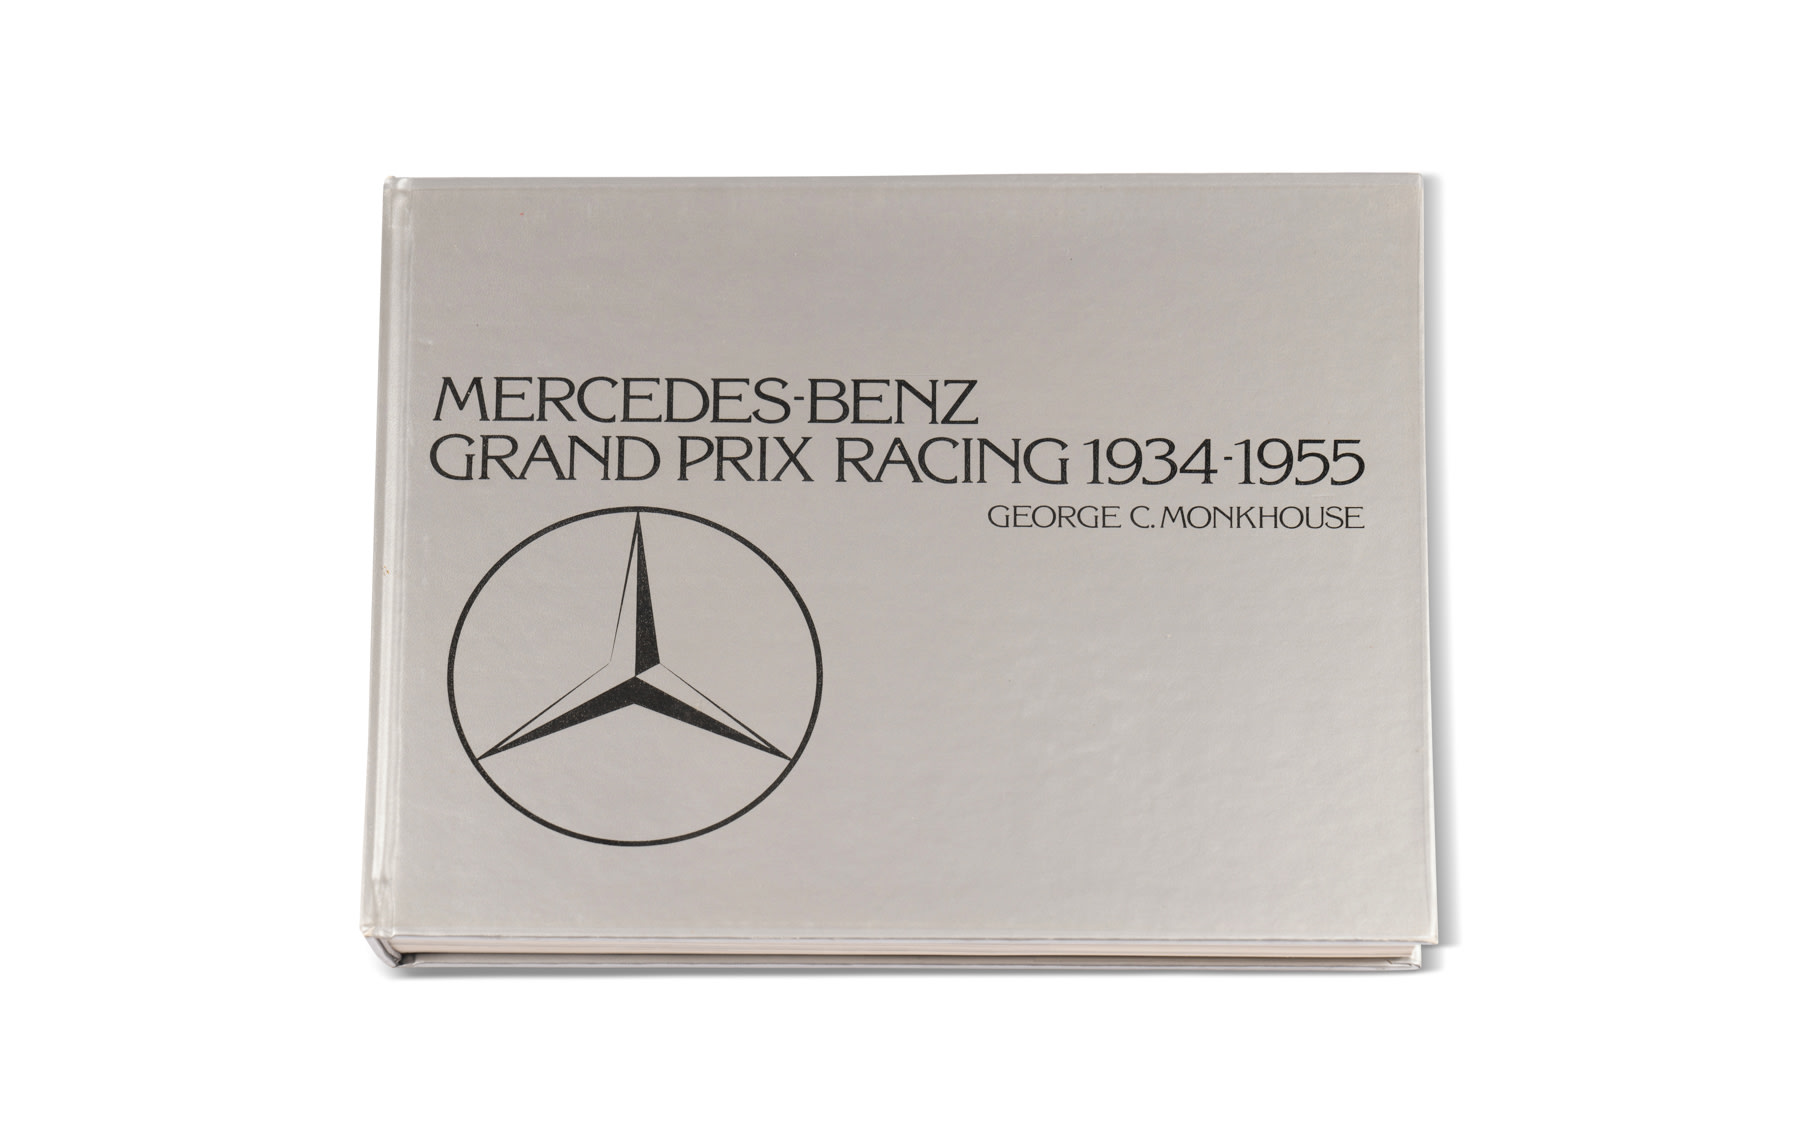 Mercedes-Benz Grand Prix Racing 1934-1955 Book by George C. Monkhouse  